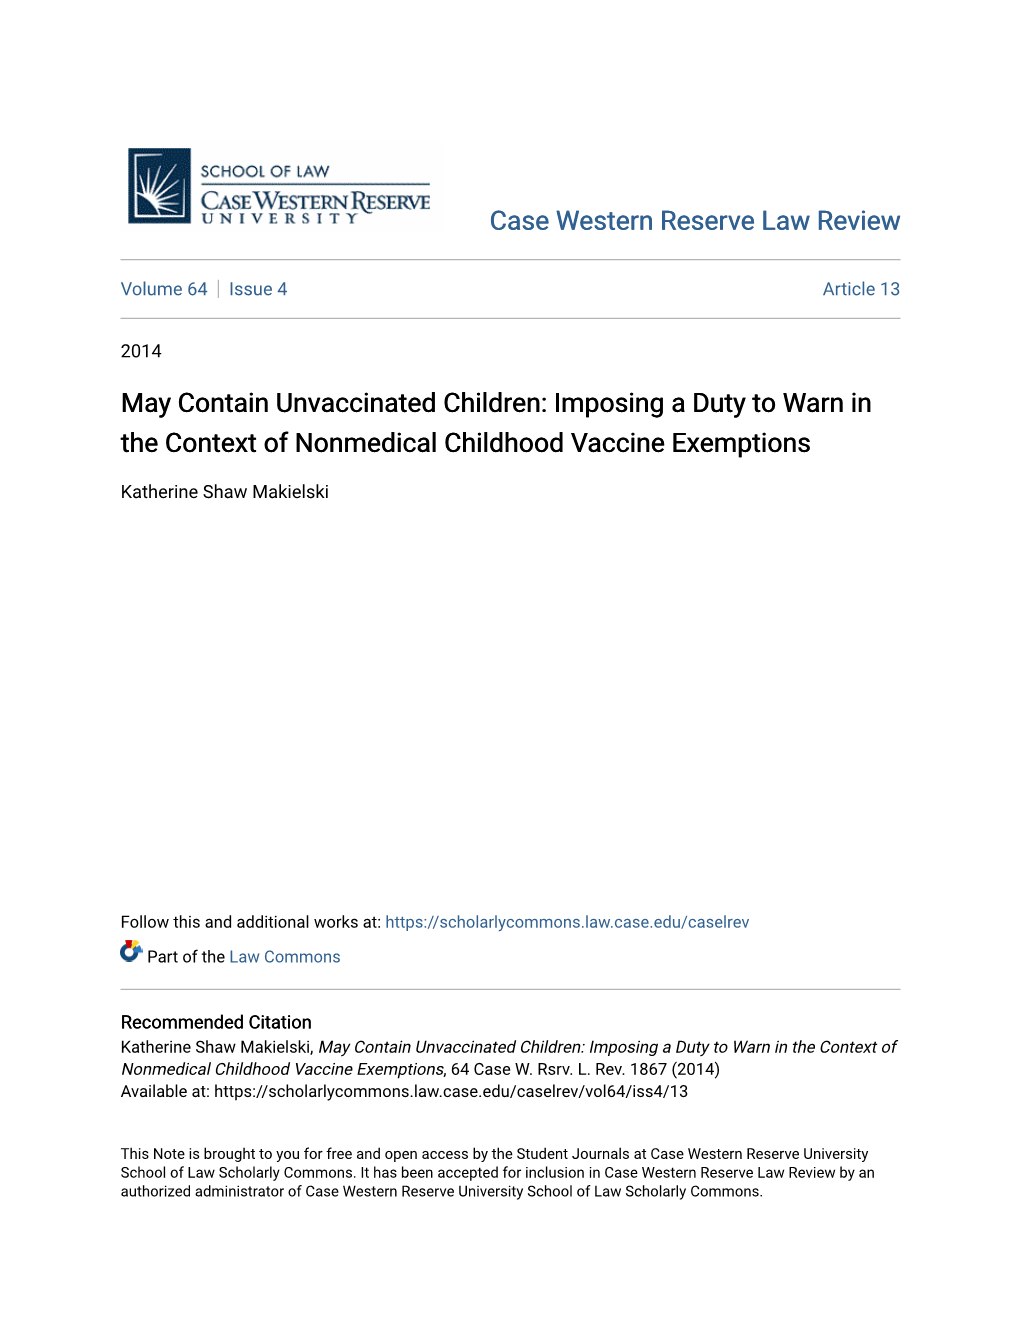 May Contain Unvaccinated Children: Imposing a Duty to Warn in the Context of Nonmedical Childhood Vaccine Exemptions